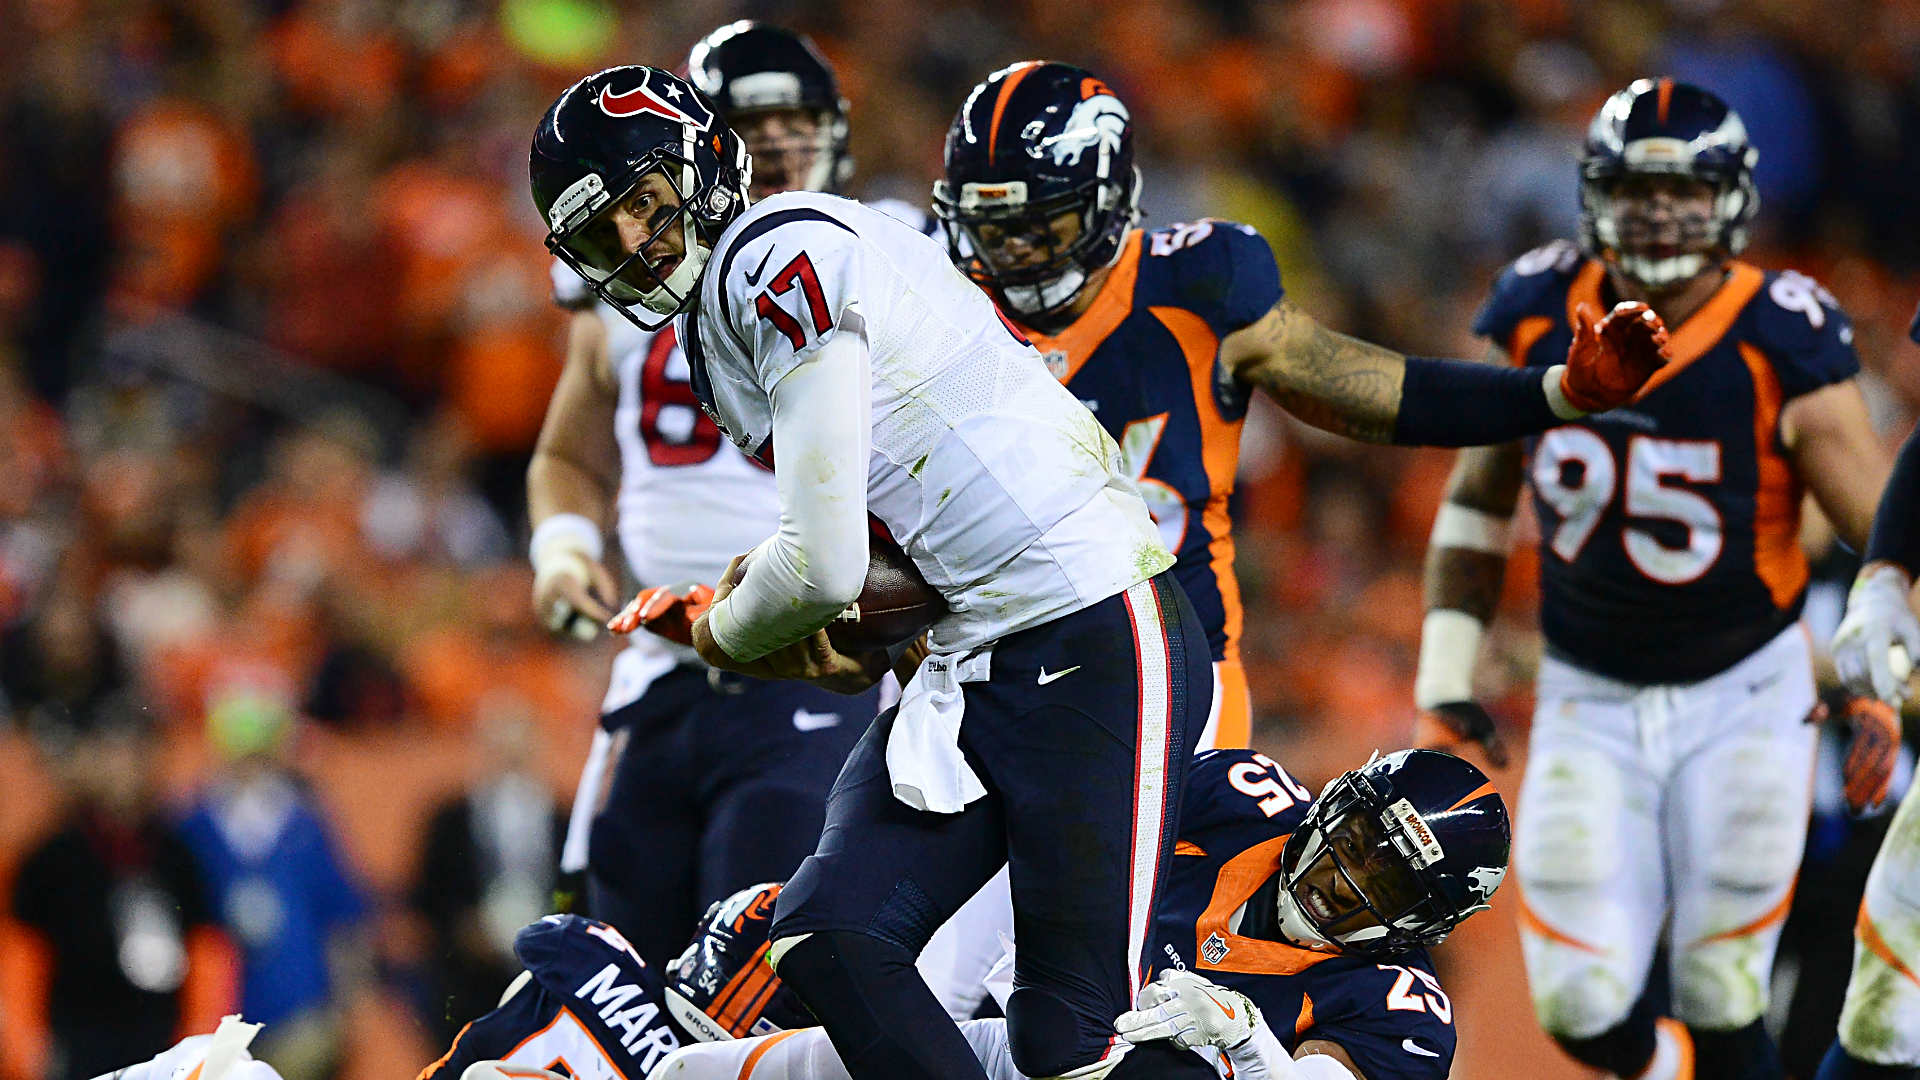 Broncos badger Brock Osweiler, Texans in dominant fashion